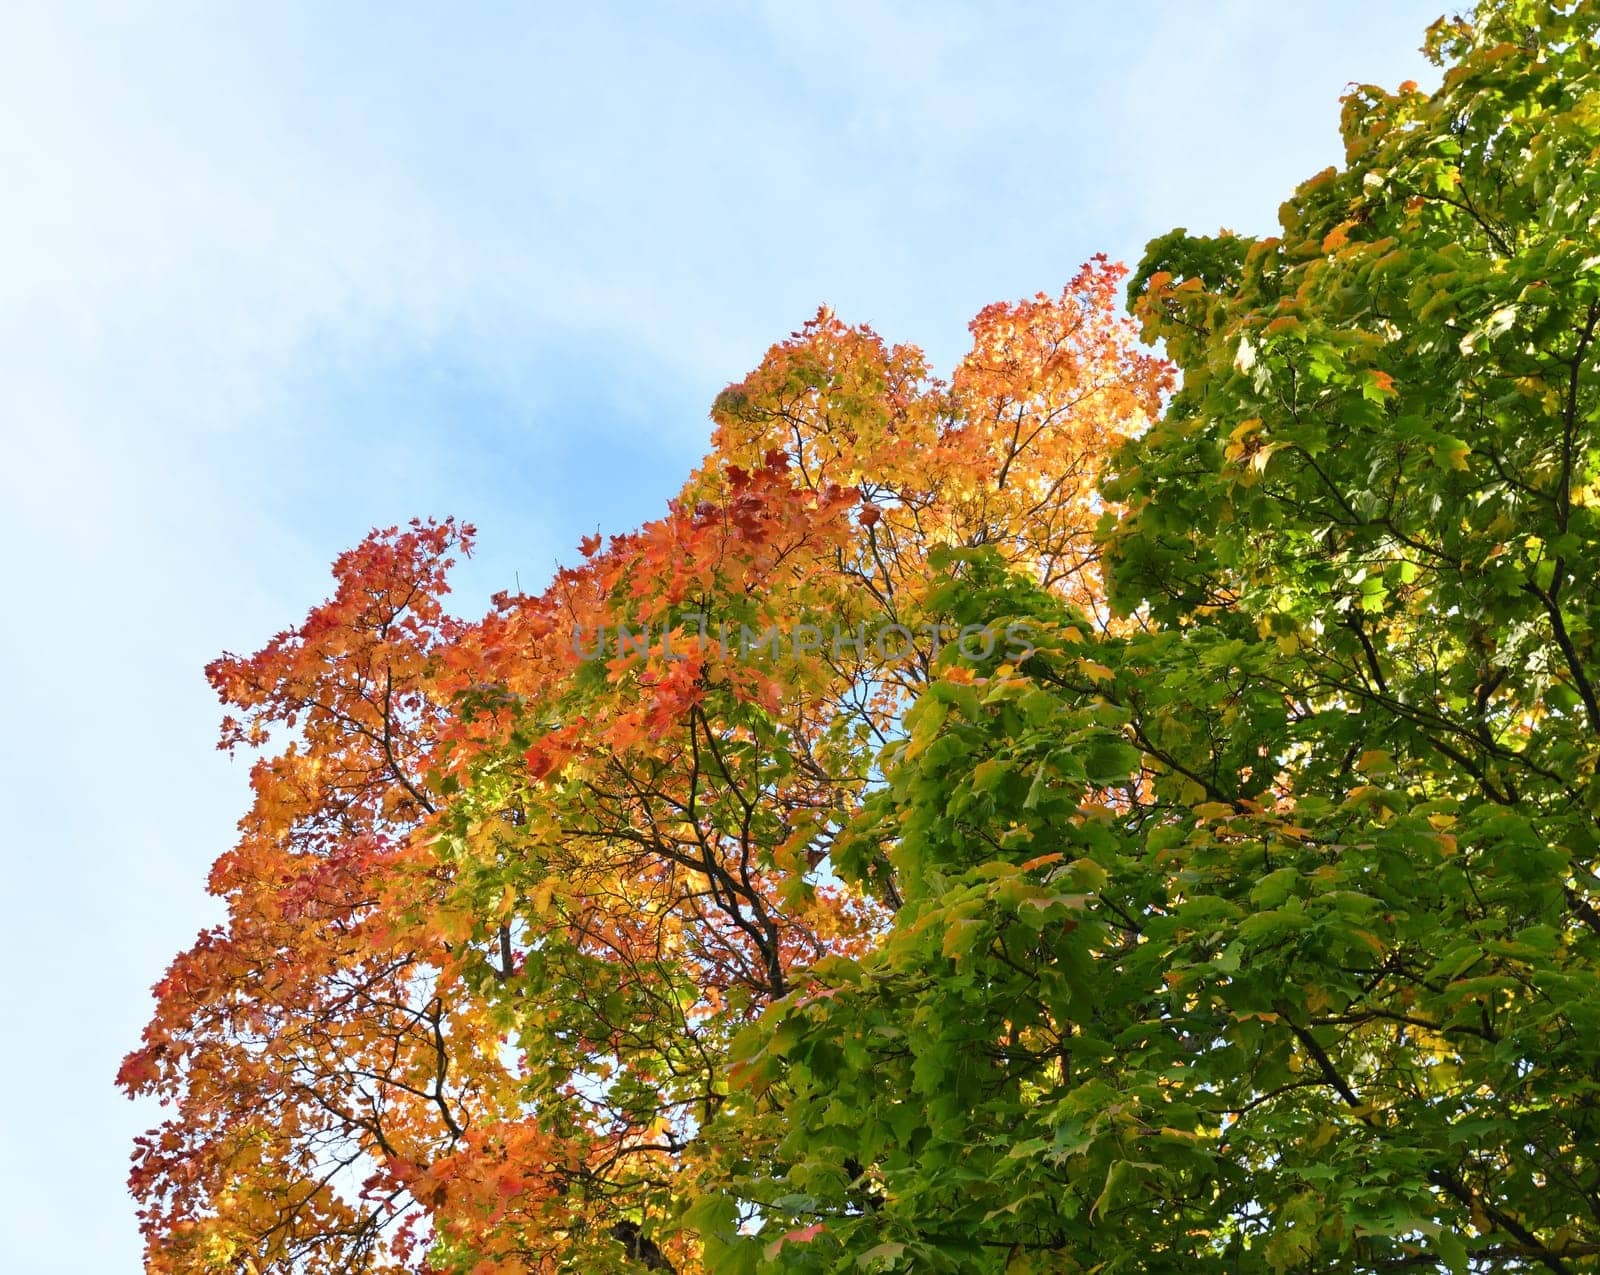 Green and red leaves of the maple tree top